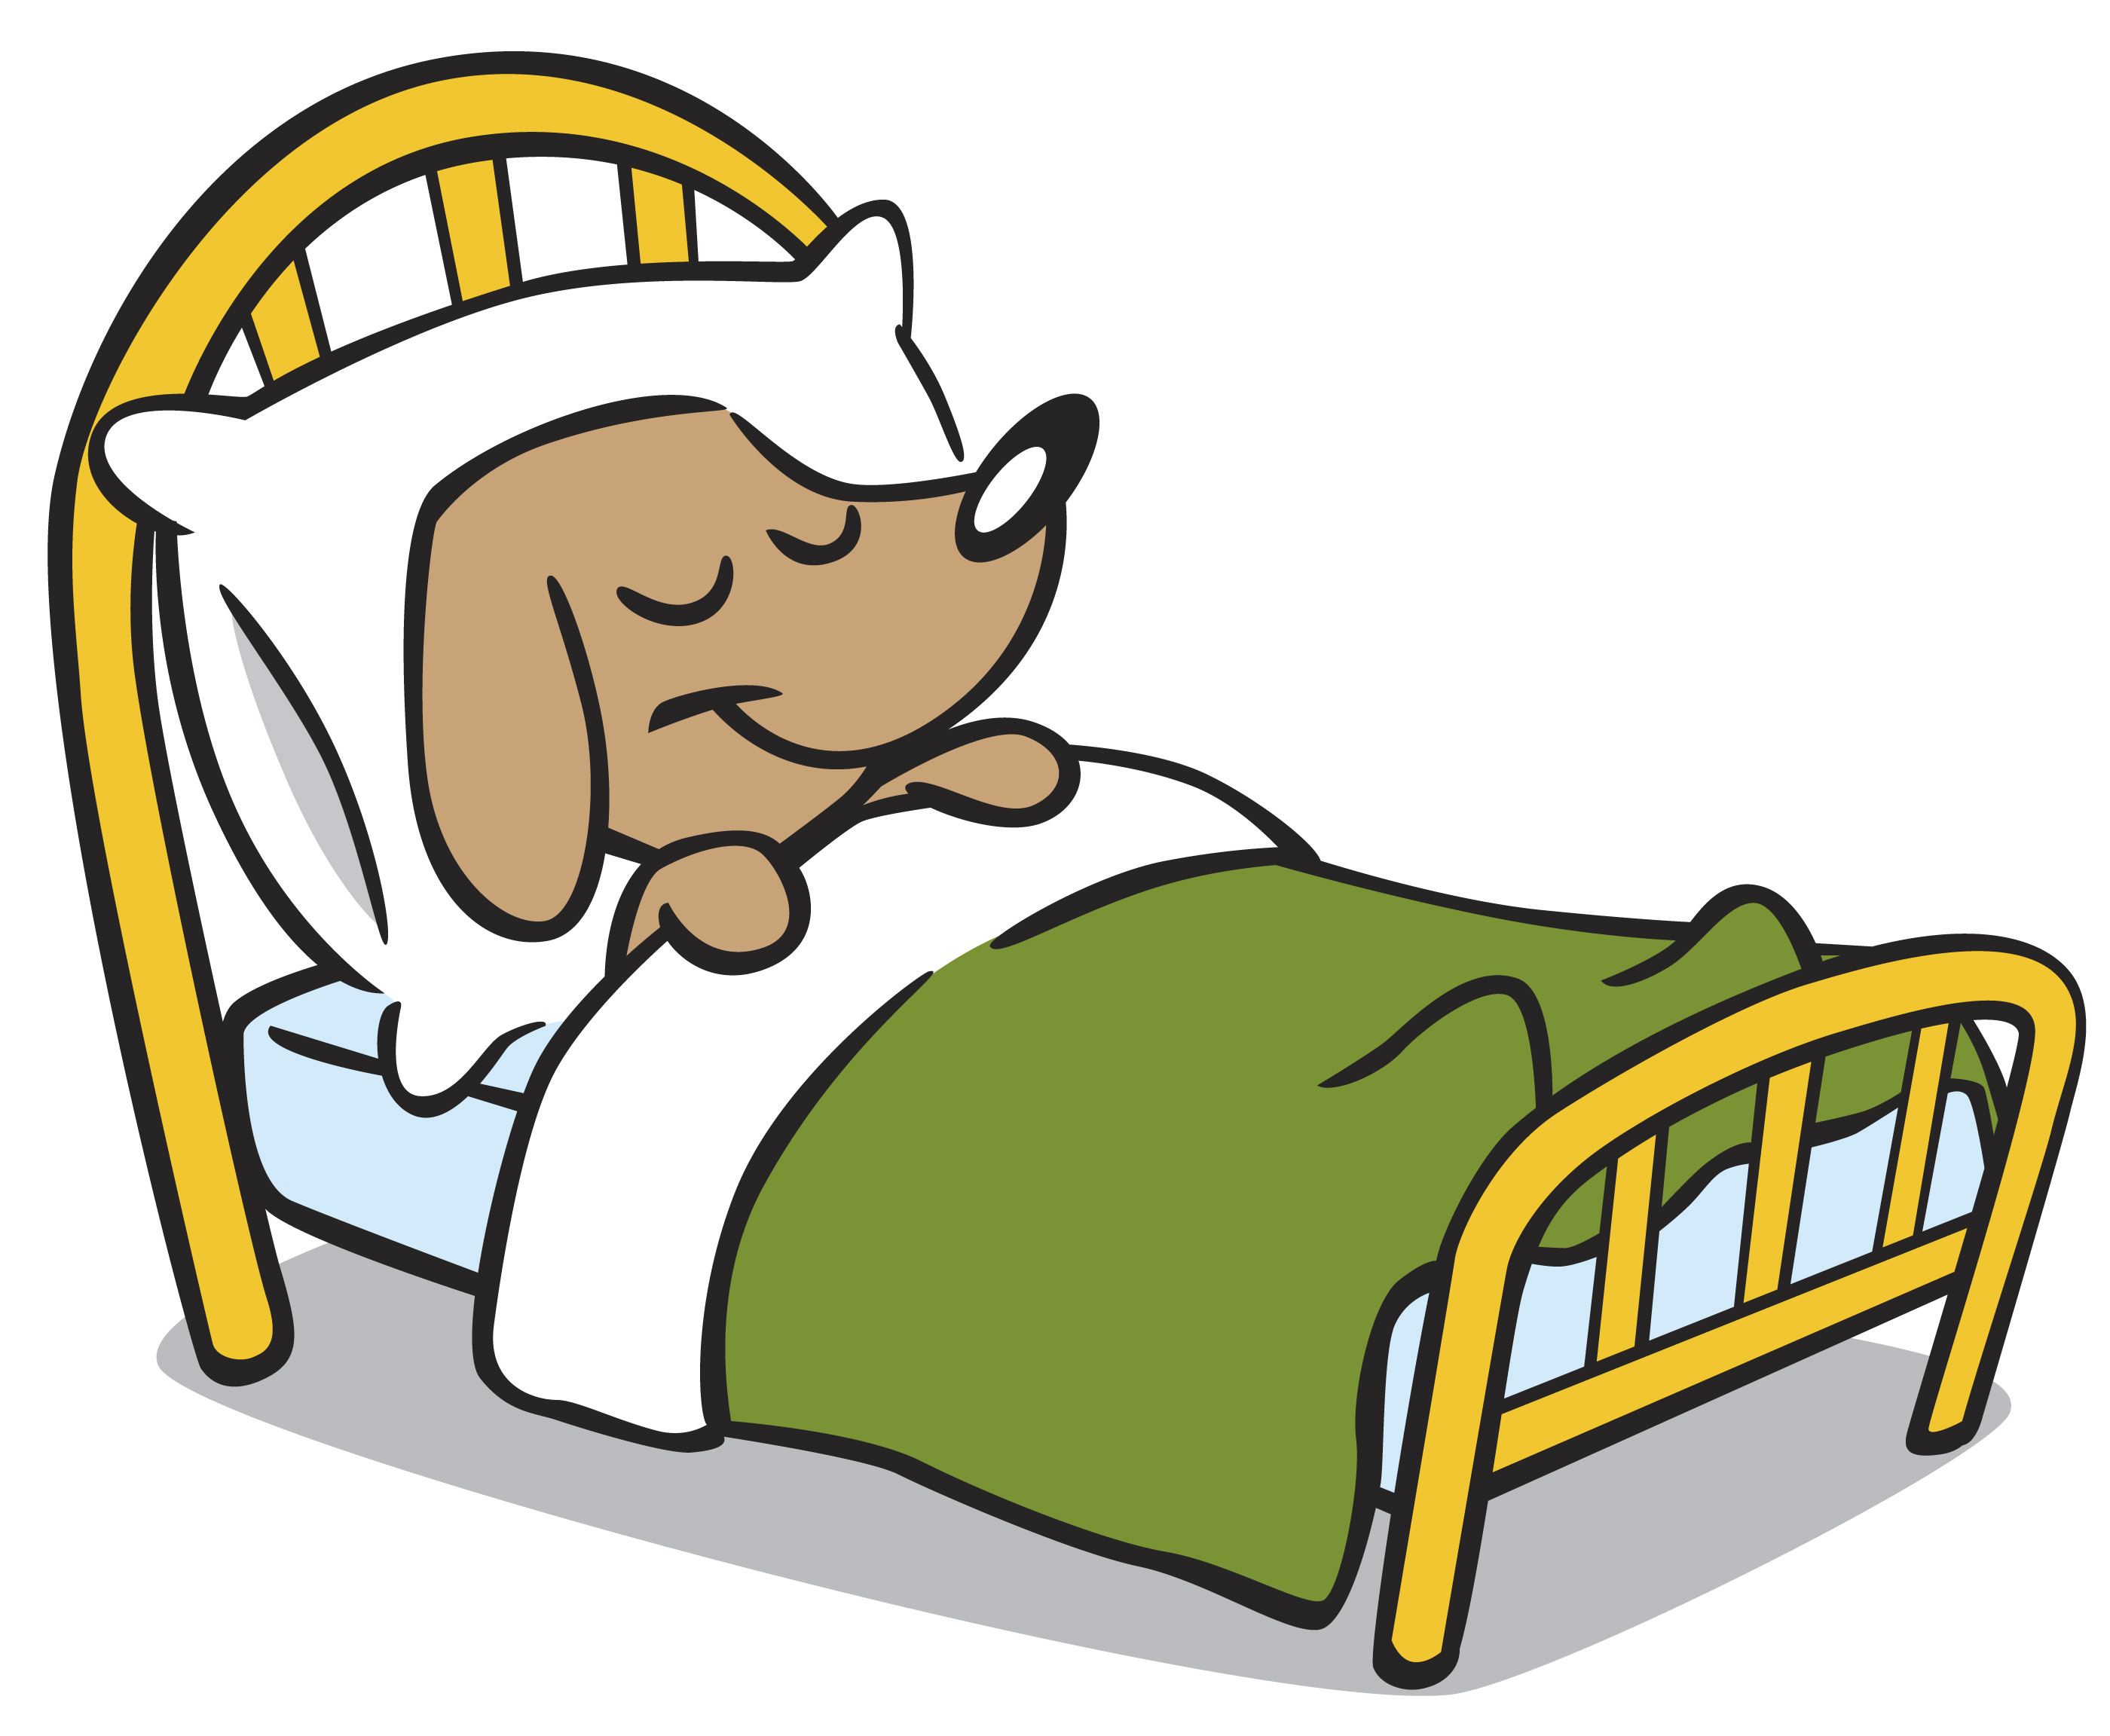 Make bed clipart free images 5 3